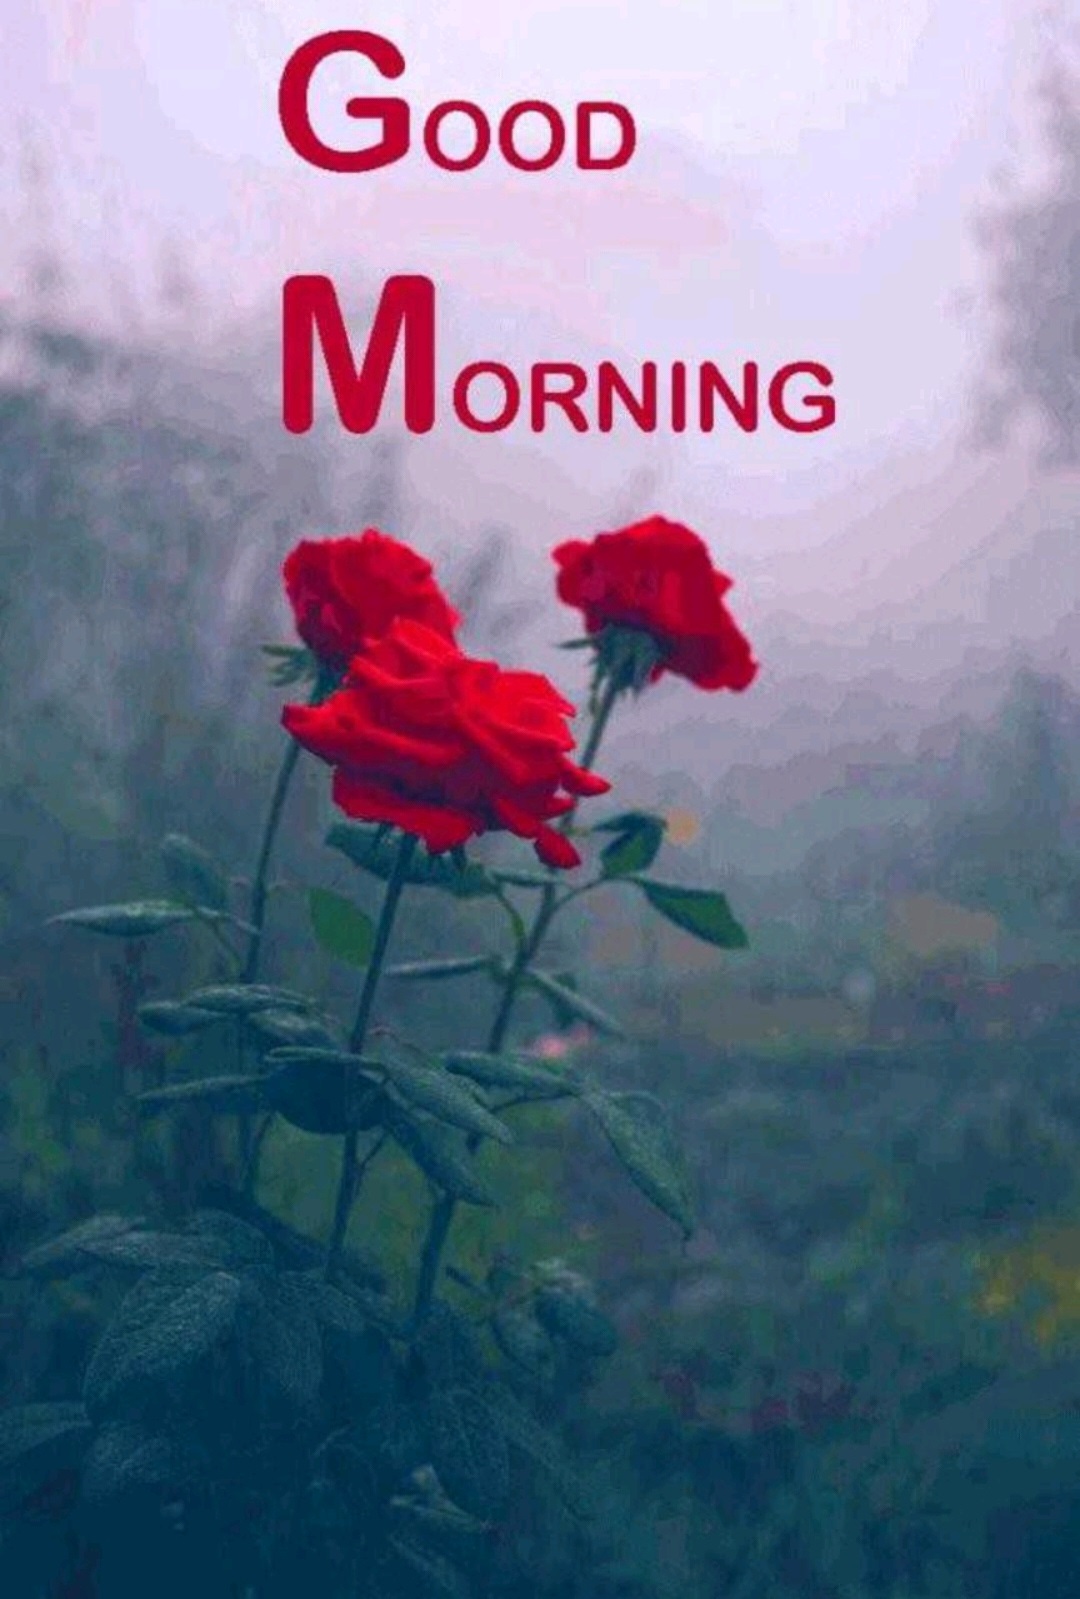 25+ Good Morning Images with Flowers HD Photos Download ...